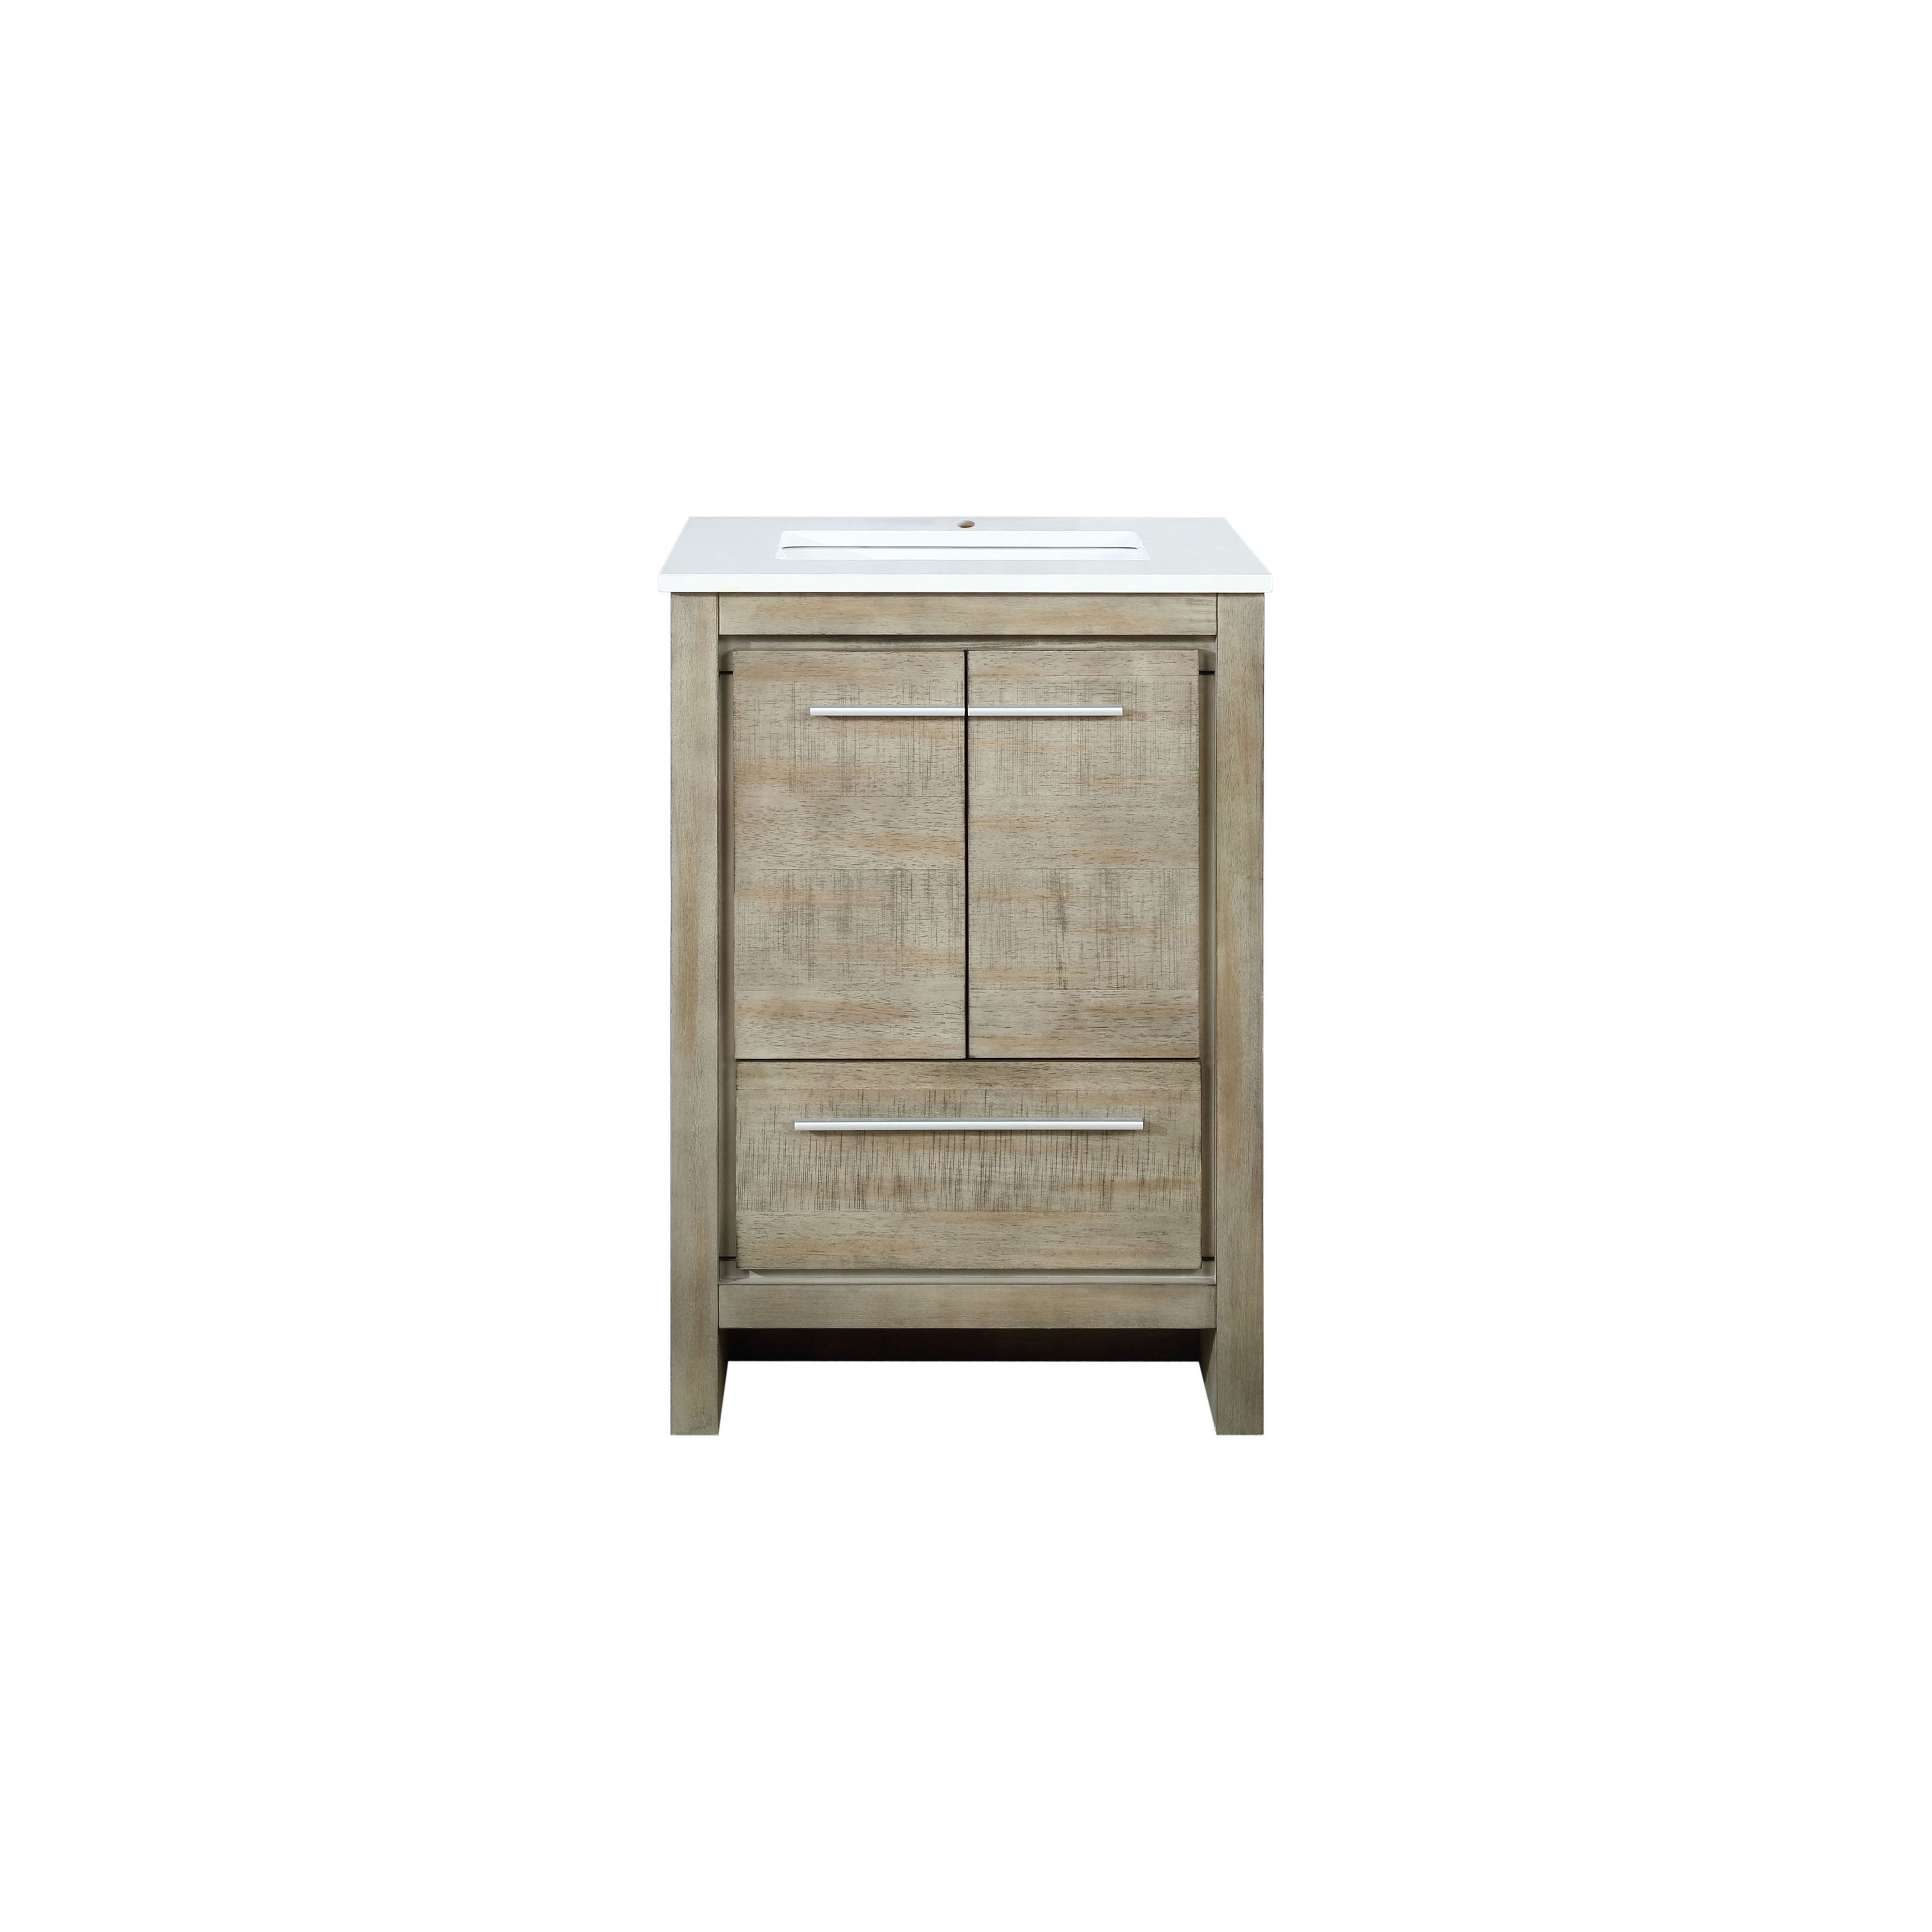 Lexora Lafarre LLF24SKSOS000 24" Single Bathroom Vanity in Rustic Acacia with White Quartz, White Rectangle Sink, Front View